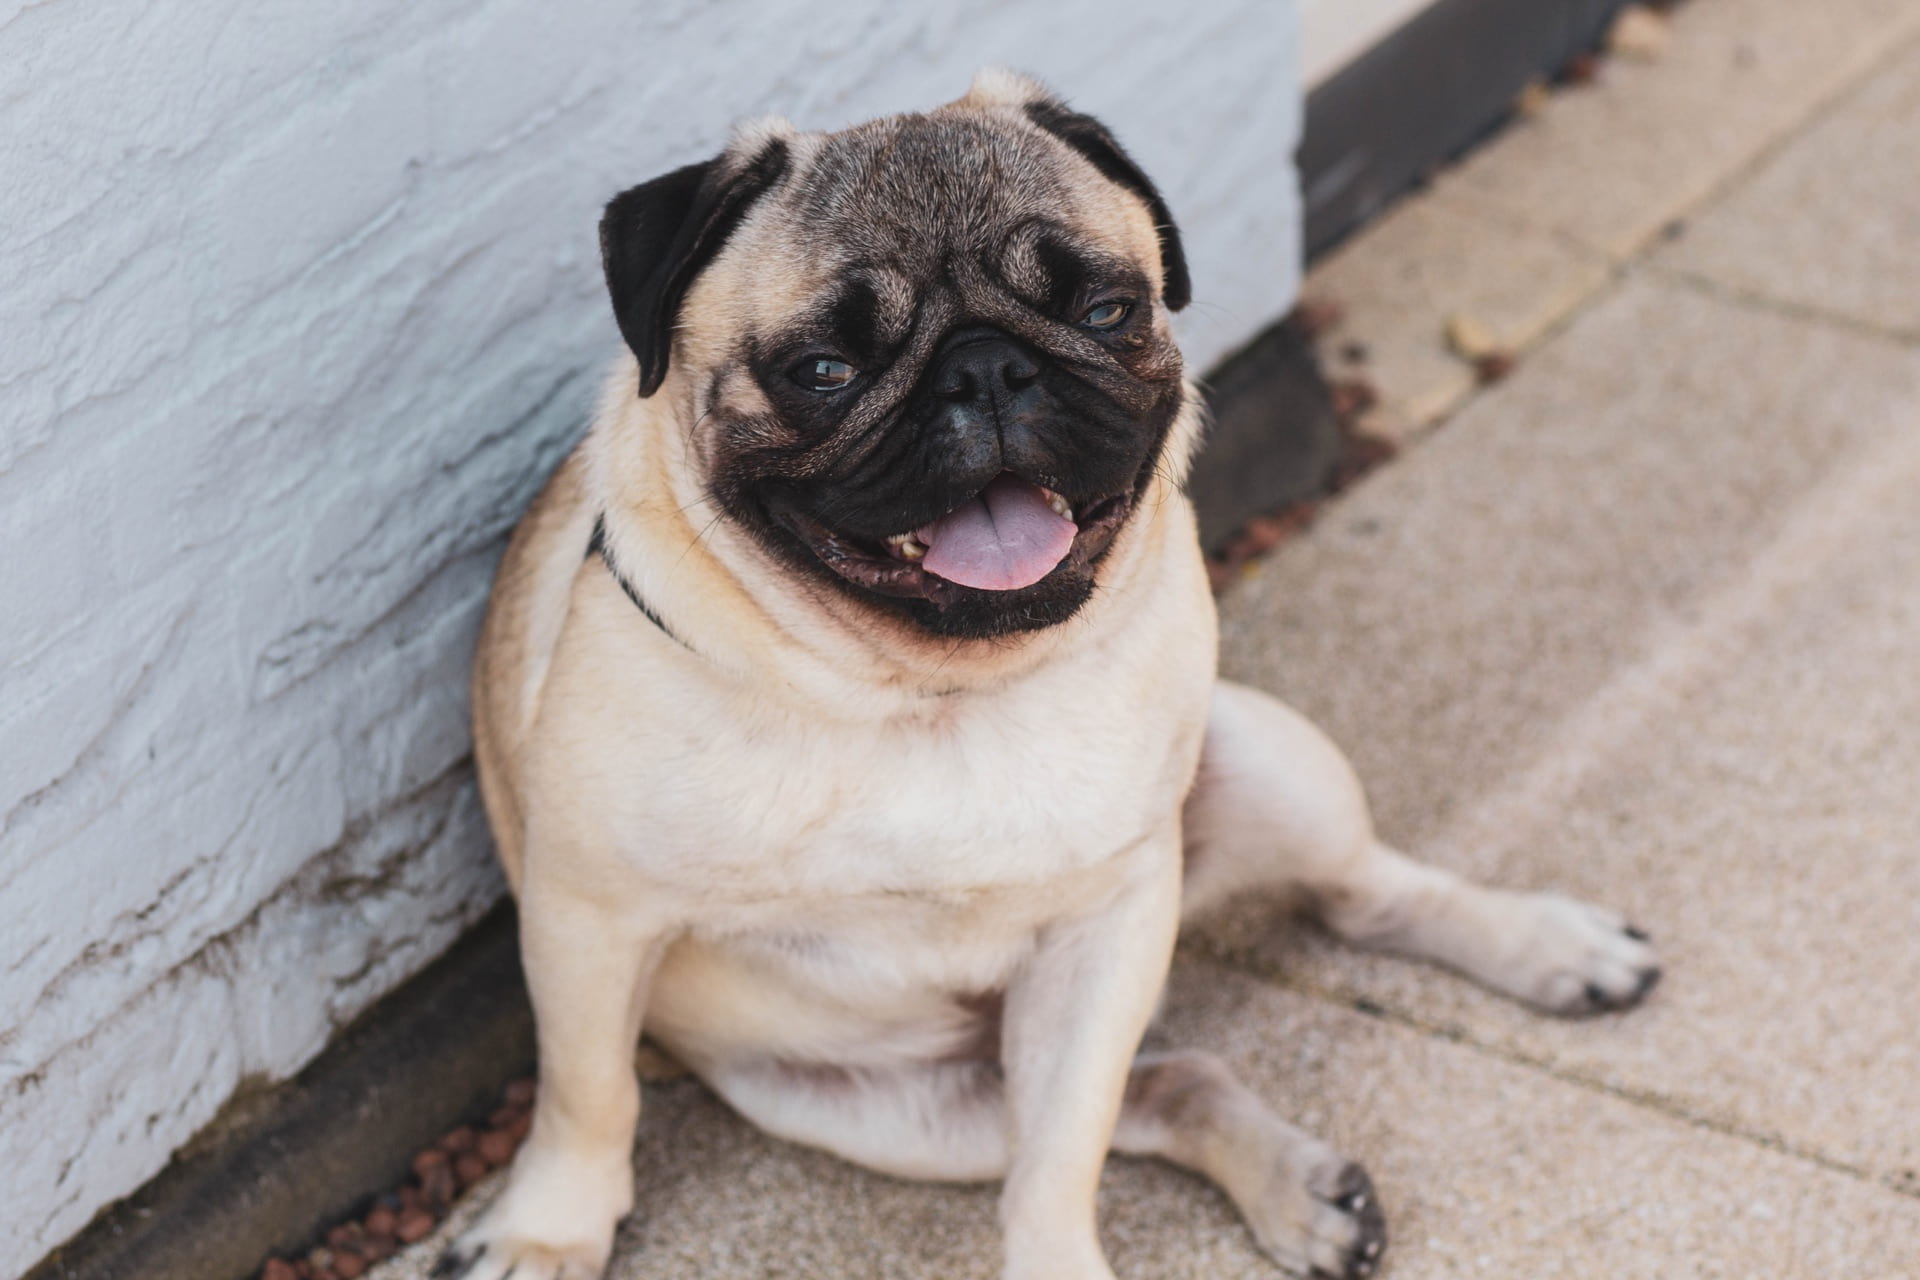 [Picture of a flat-faced dog (a pug) sitting gracelessly and panting]